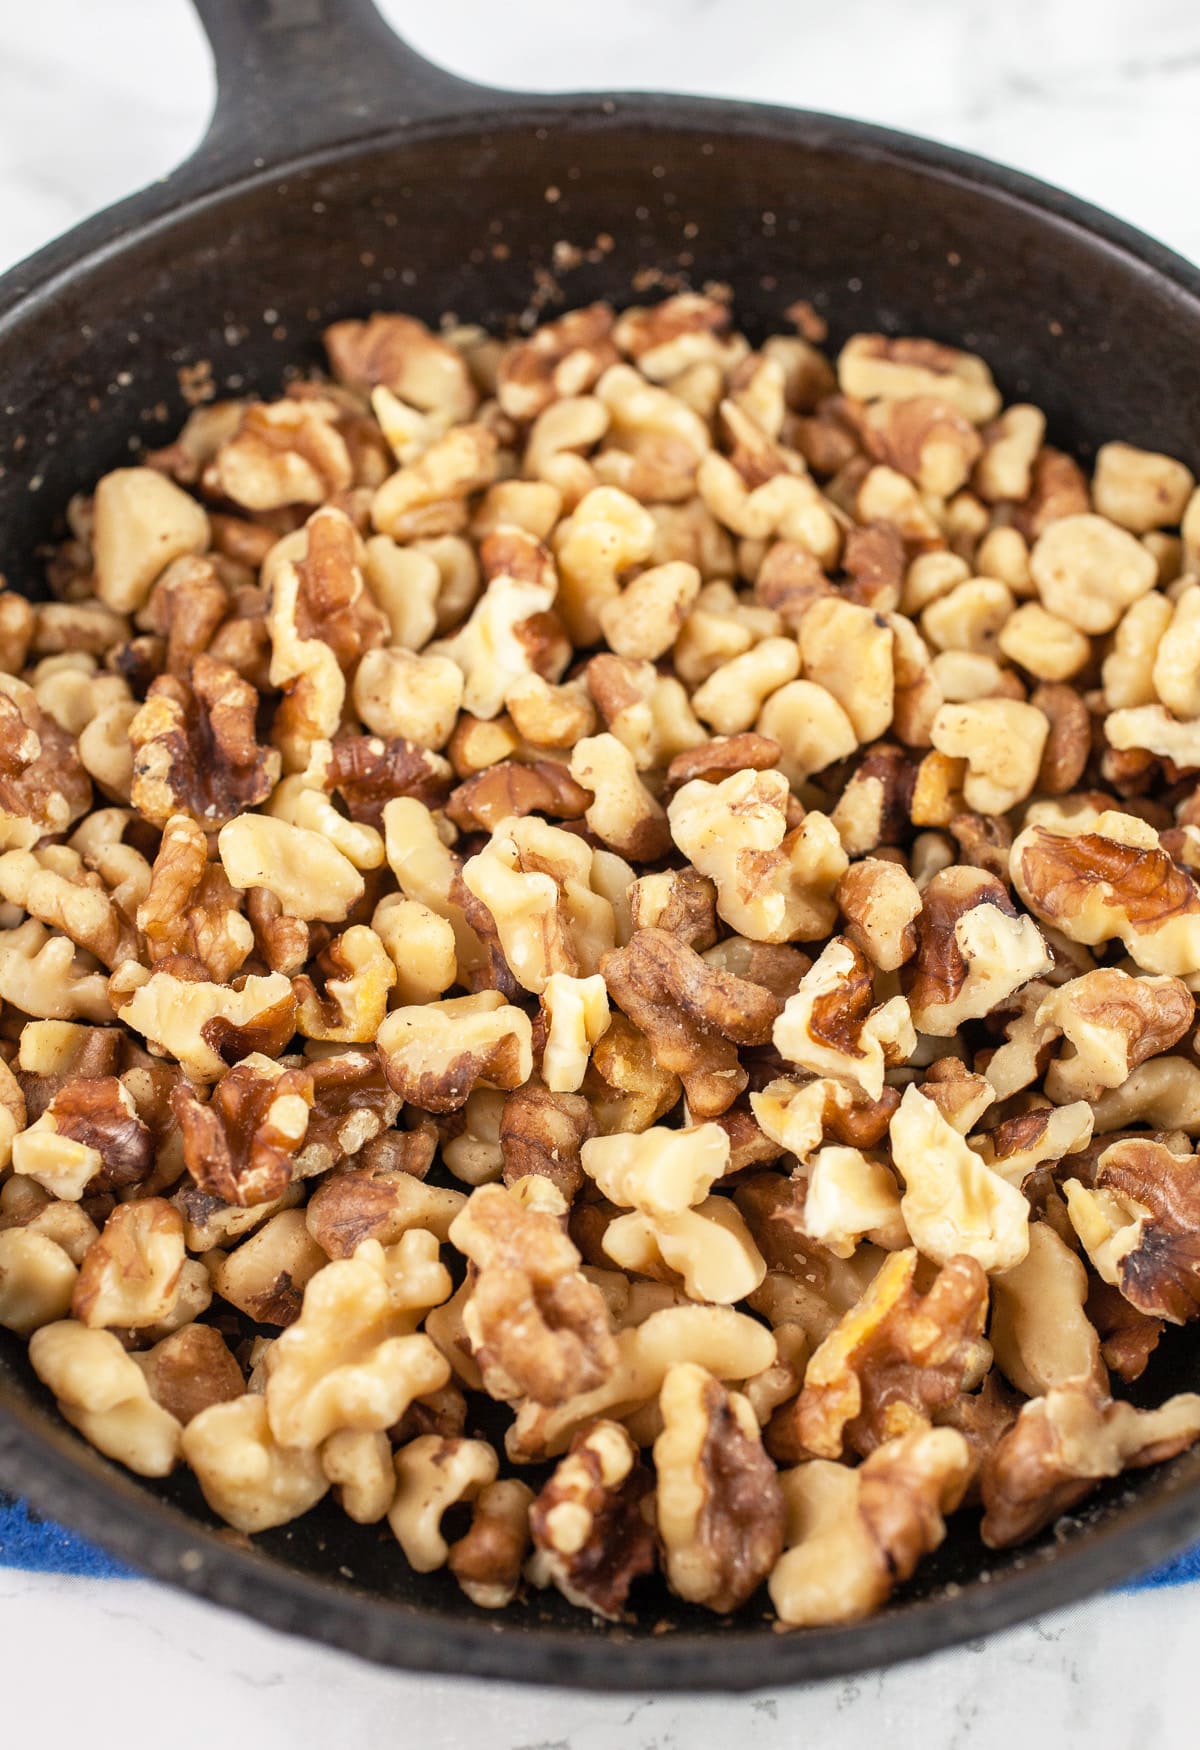 Toasted chopped walnuts in cast iron skillet.